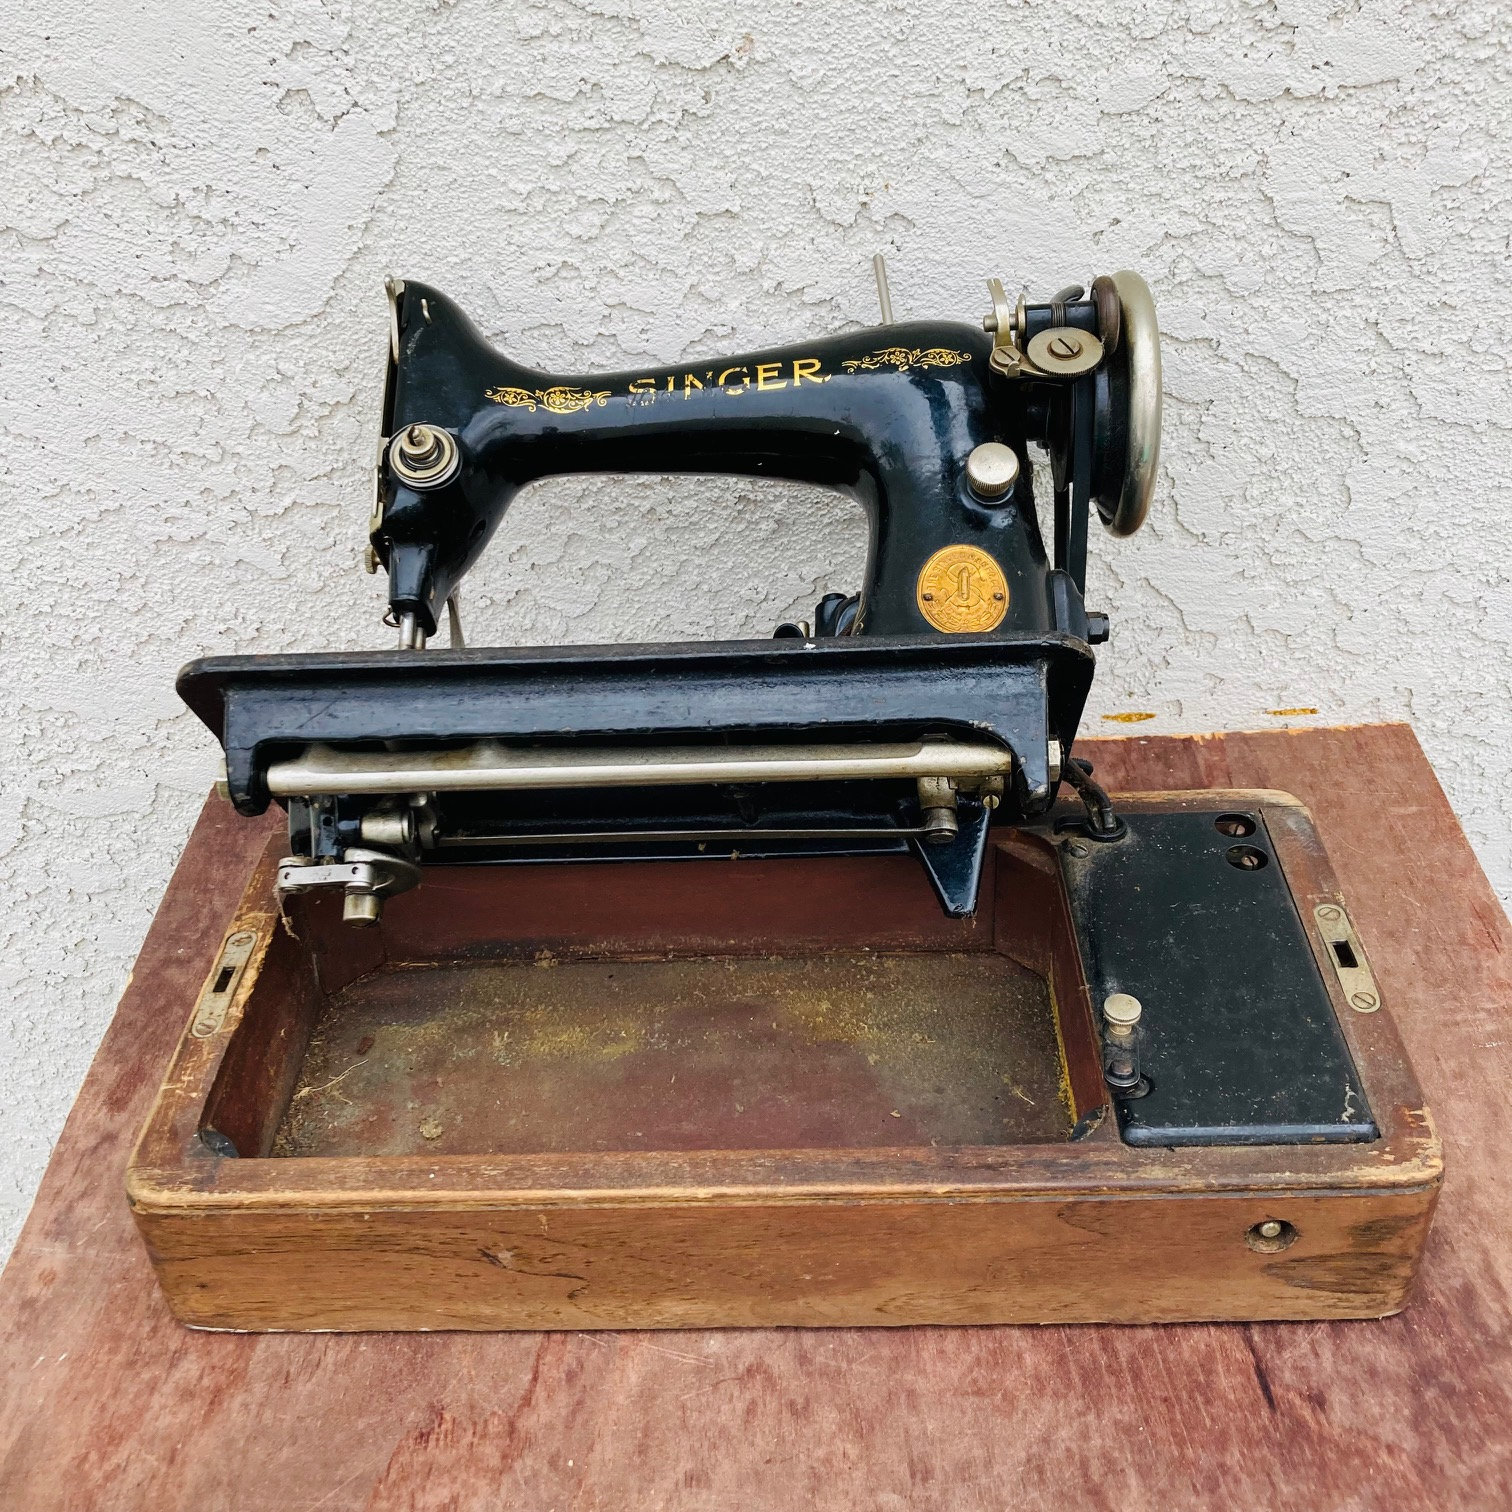 1900 's Antique Singer Sowing Machine for Sale in Tucson, AZ